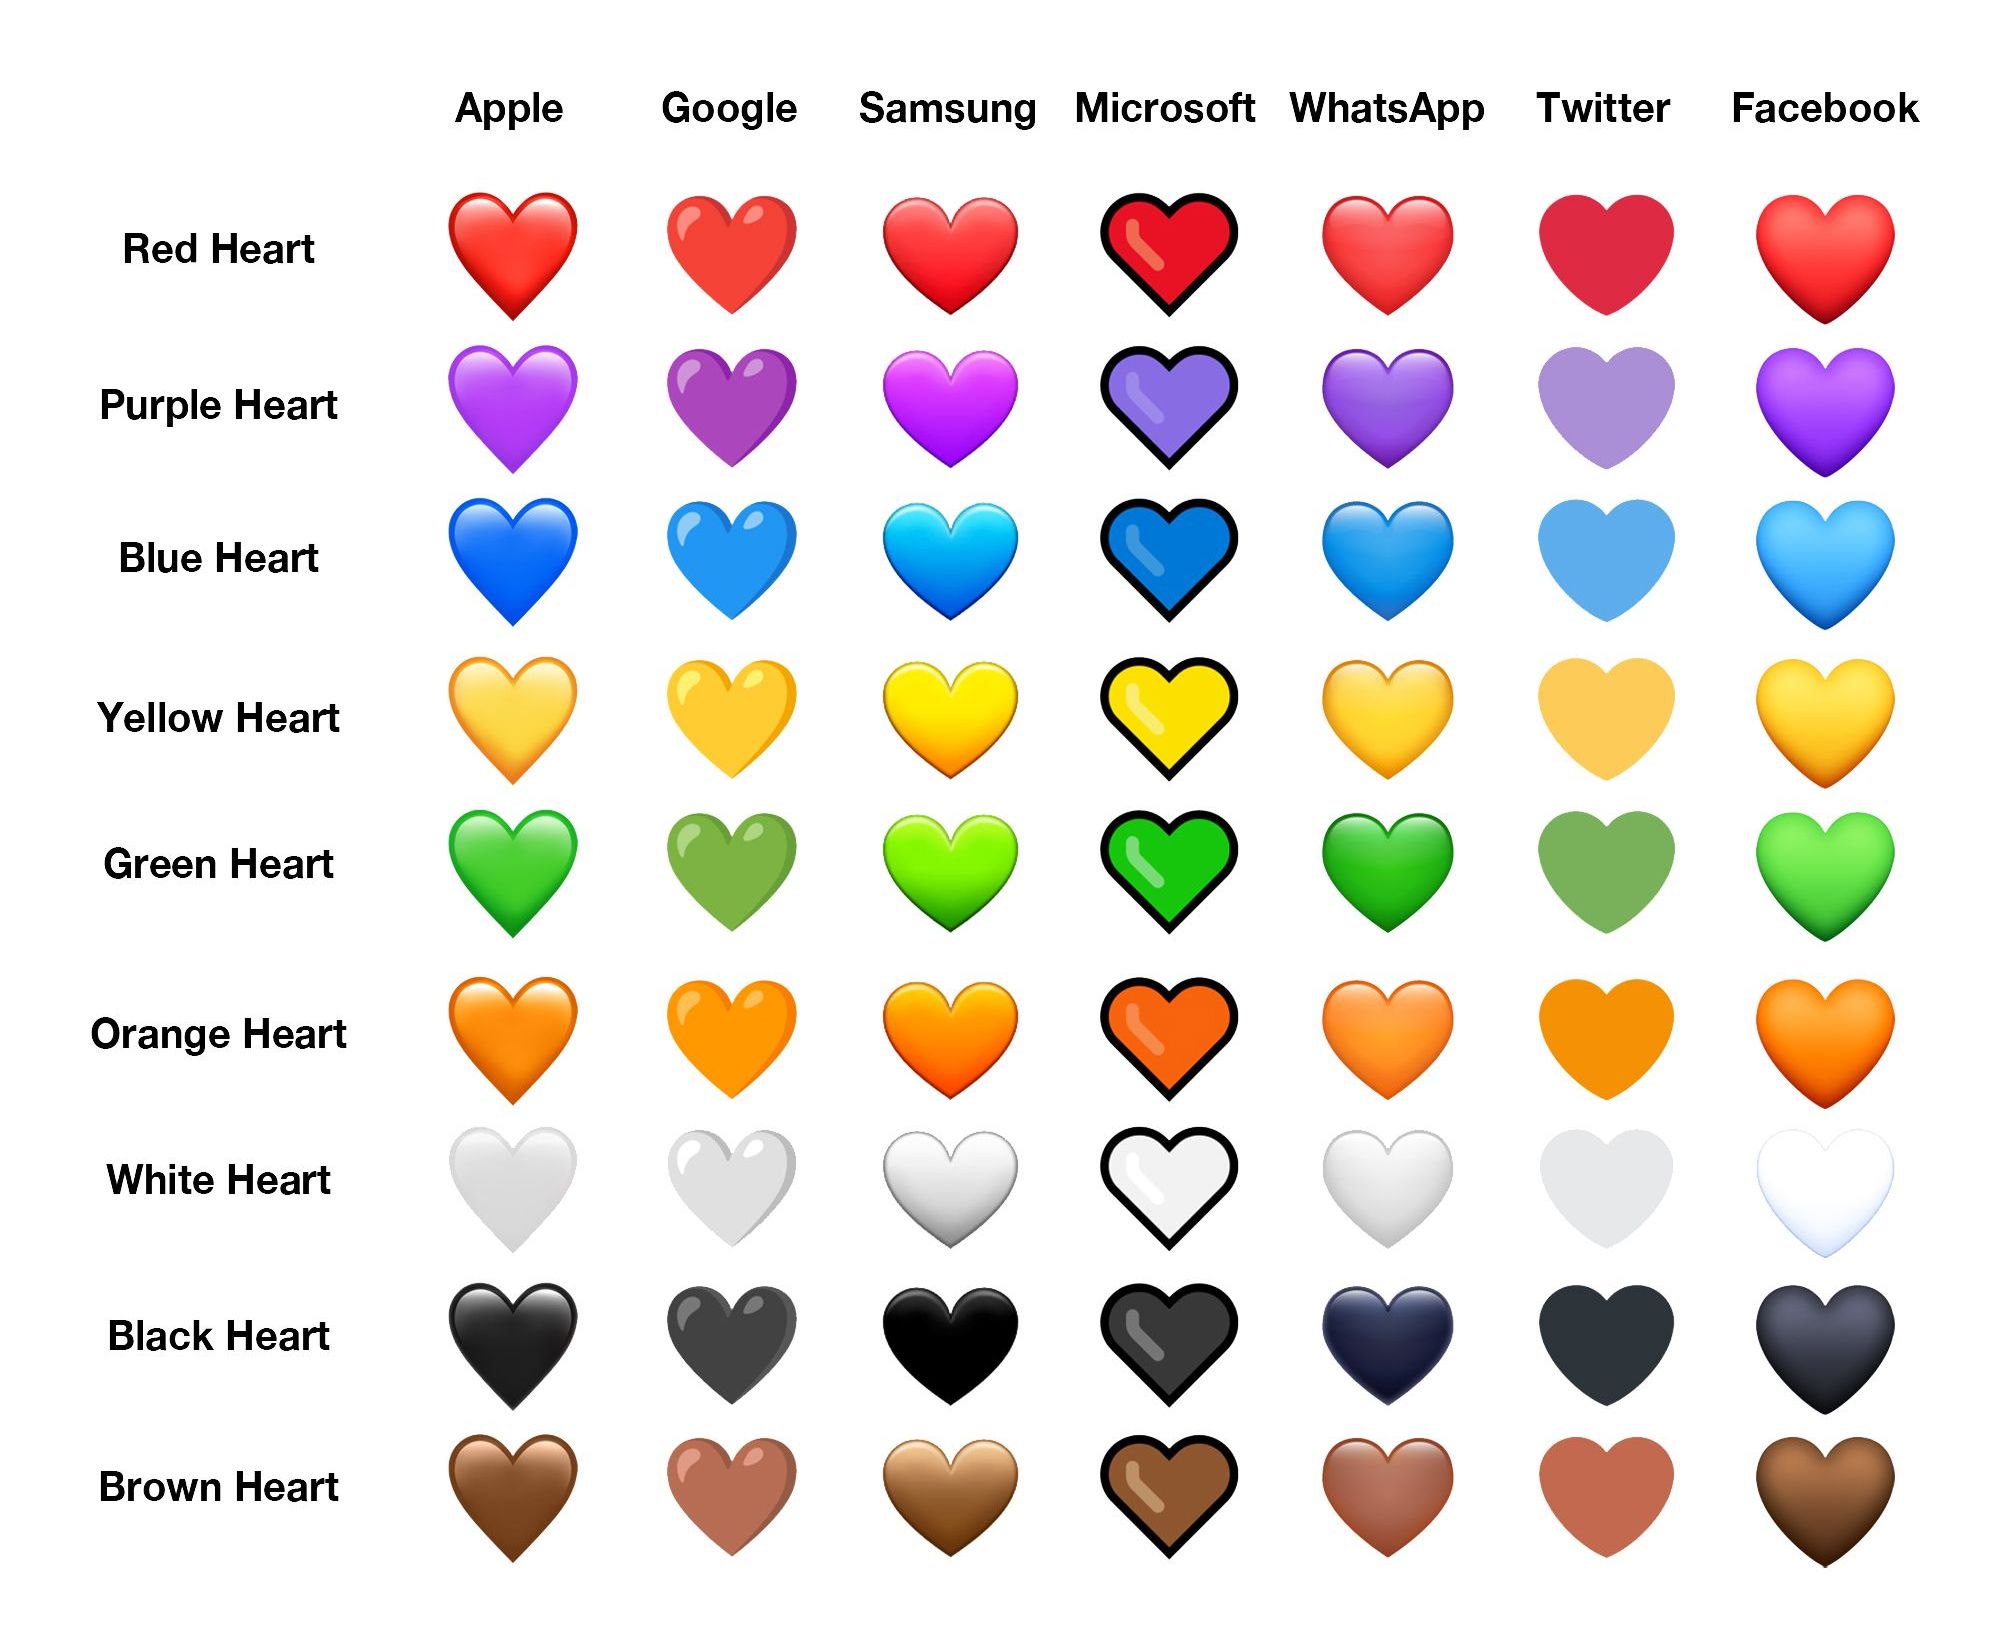 Pink Heart Emoji Might Finally Become Reality